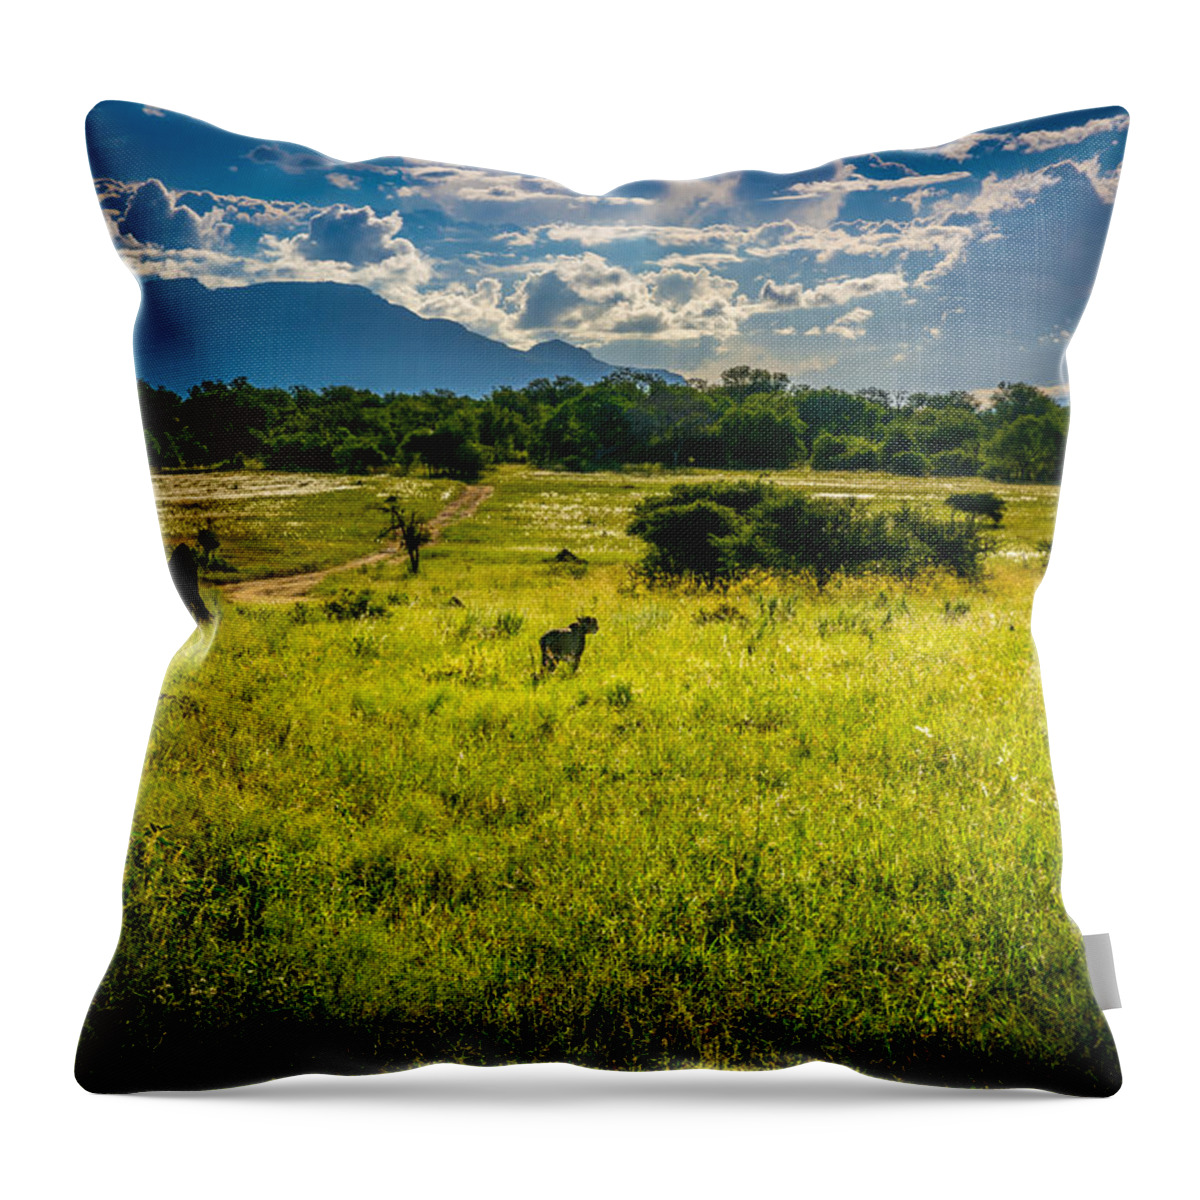 Cheetah Throw Pillow featuring the photograph The Cheetah by Andrew Matwijec